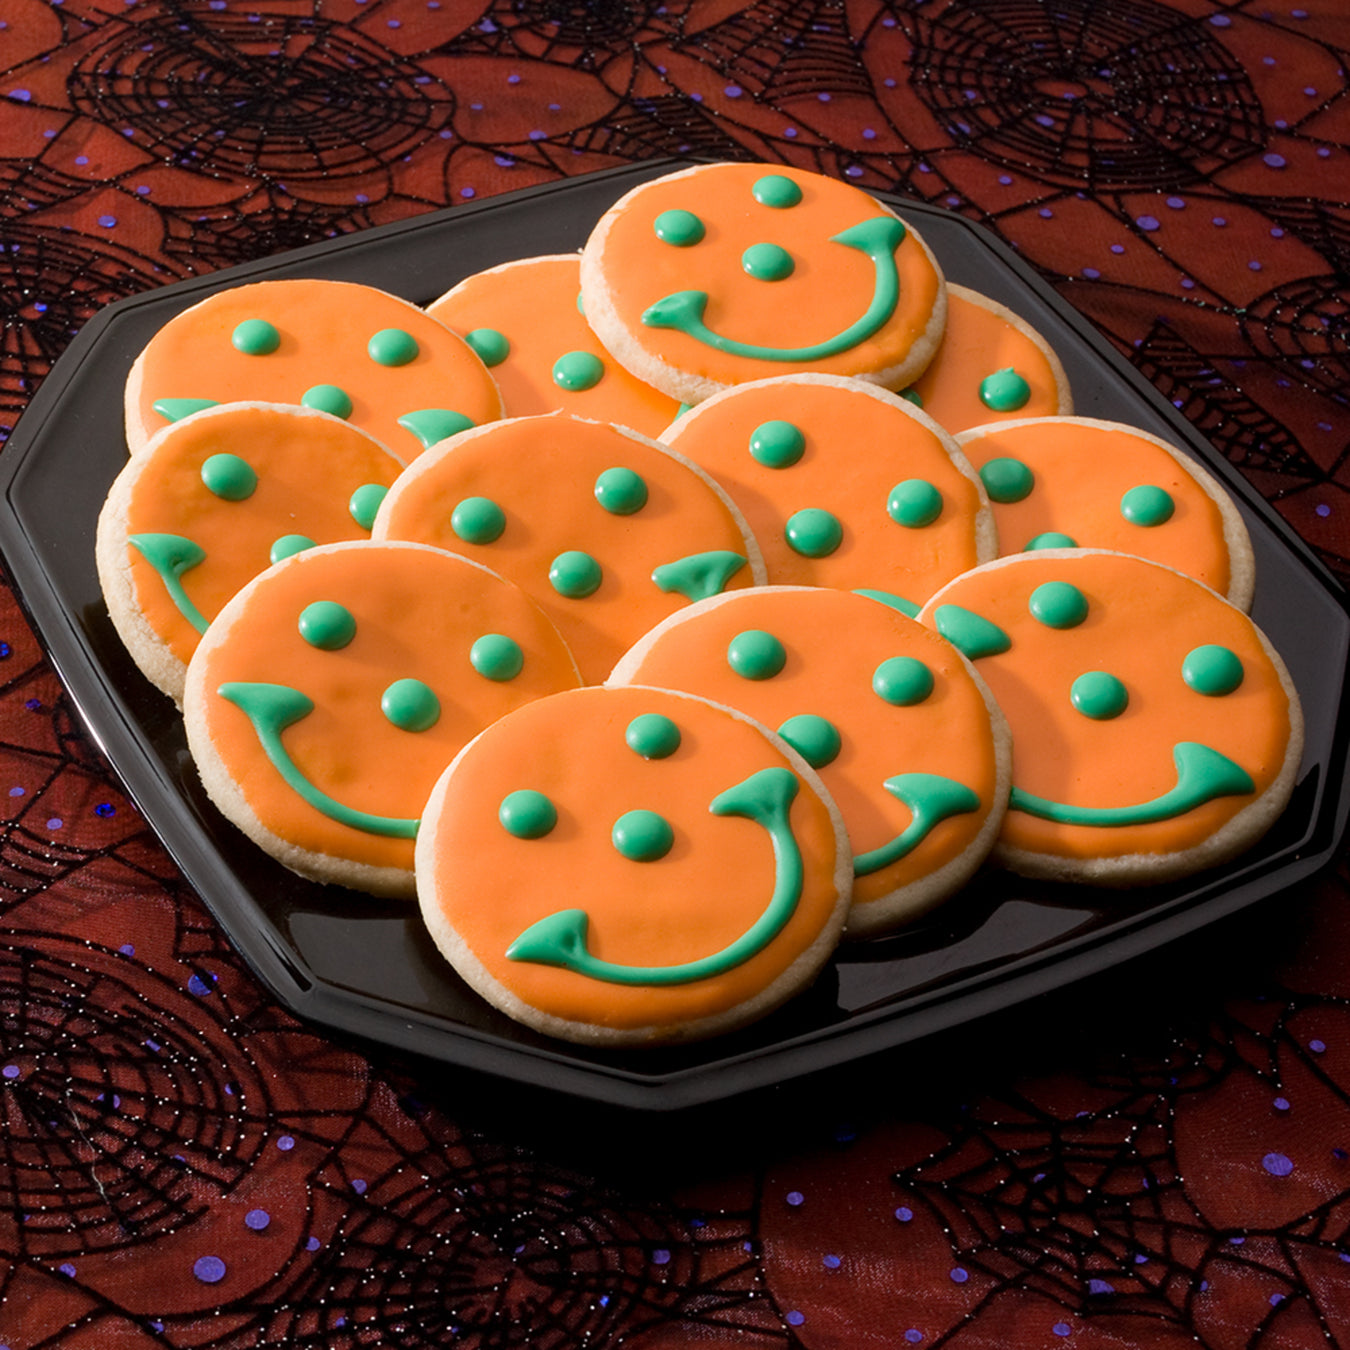 create your own smiley face cookies in colors of orange and green for halloween